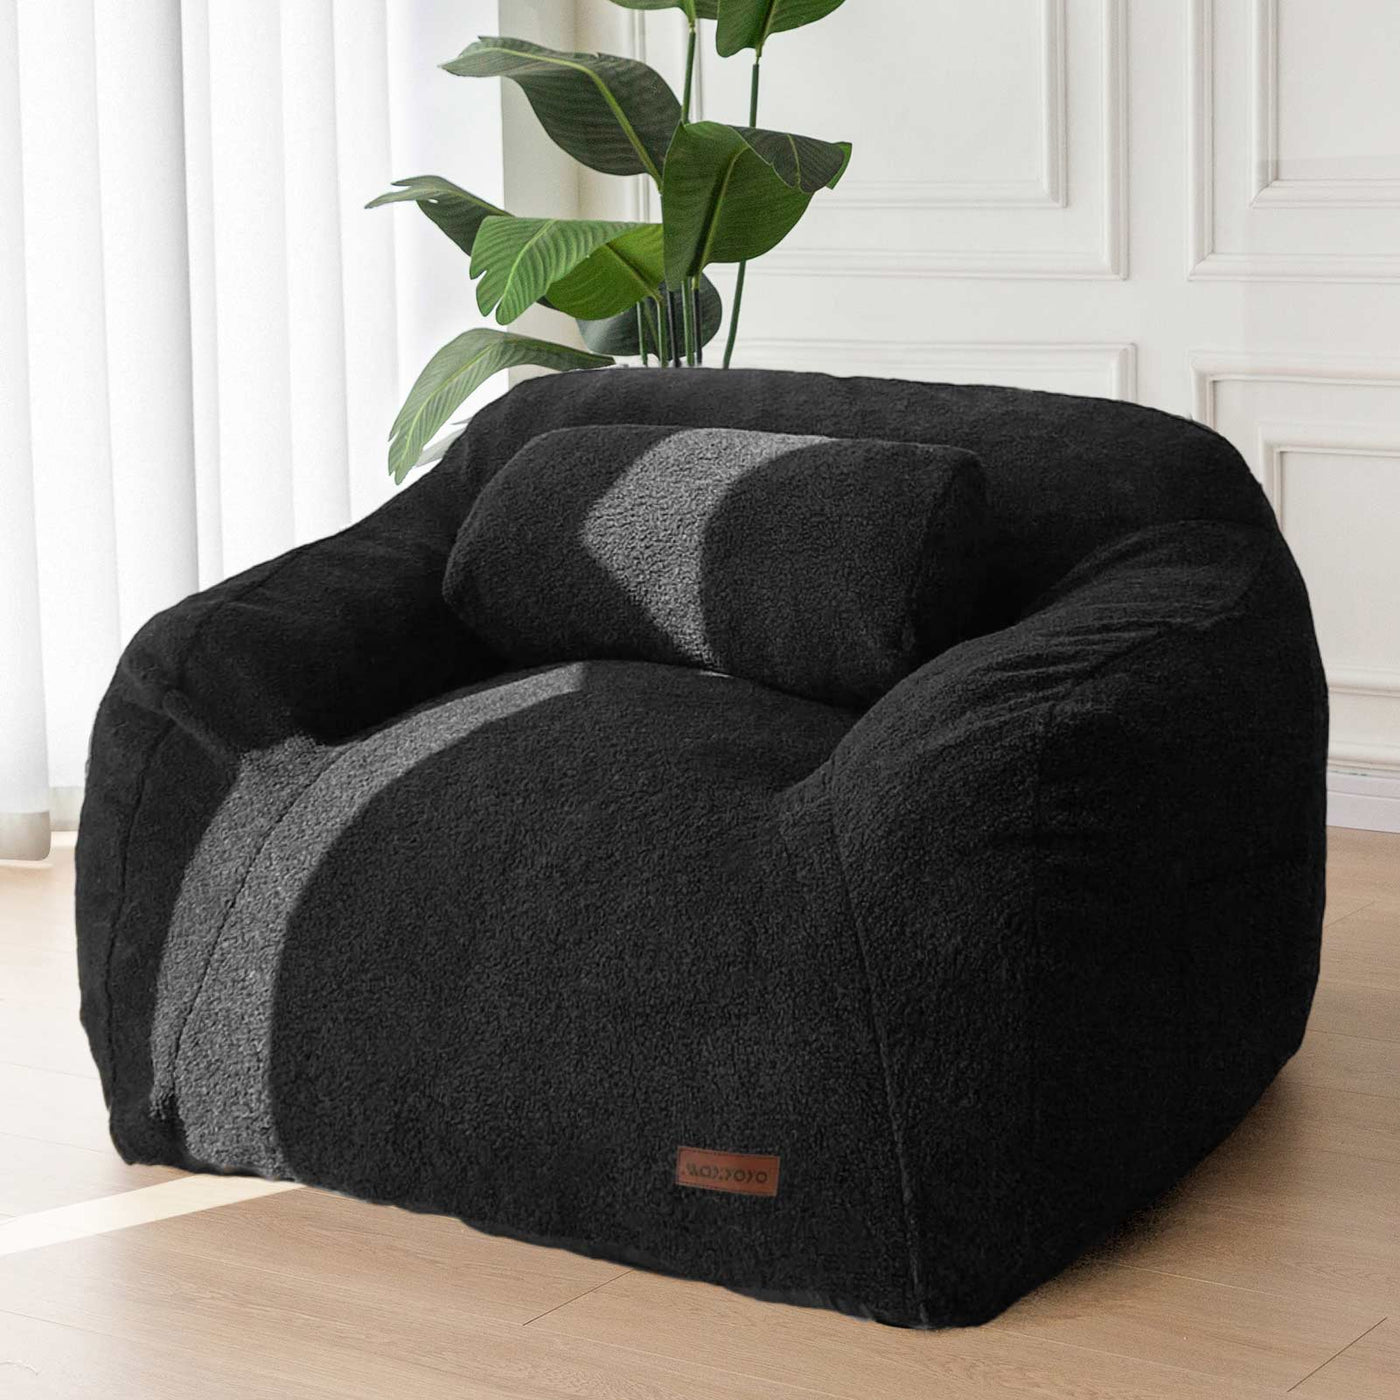 MAXYOYO Giant Bean Bag Chair with Pillow, Fuzzy Comfy Large Bean Bag Chair Couch for Reading and Gaming, Black